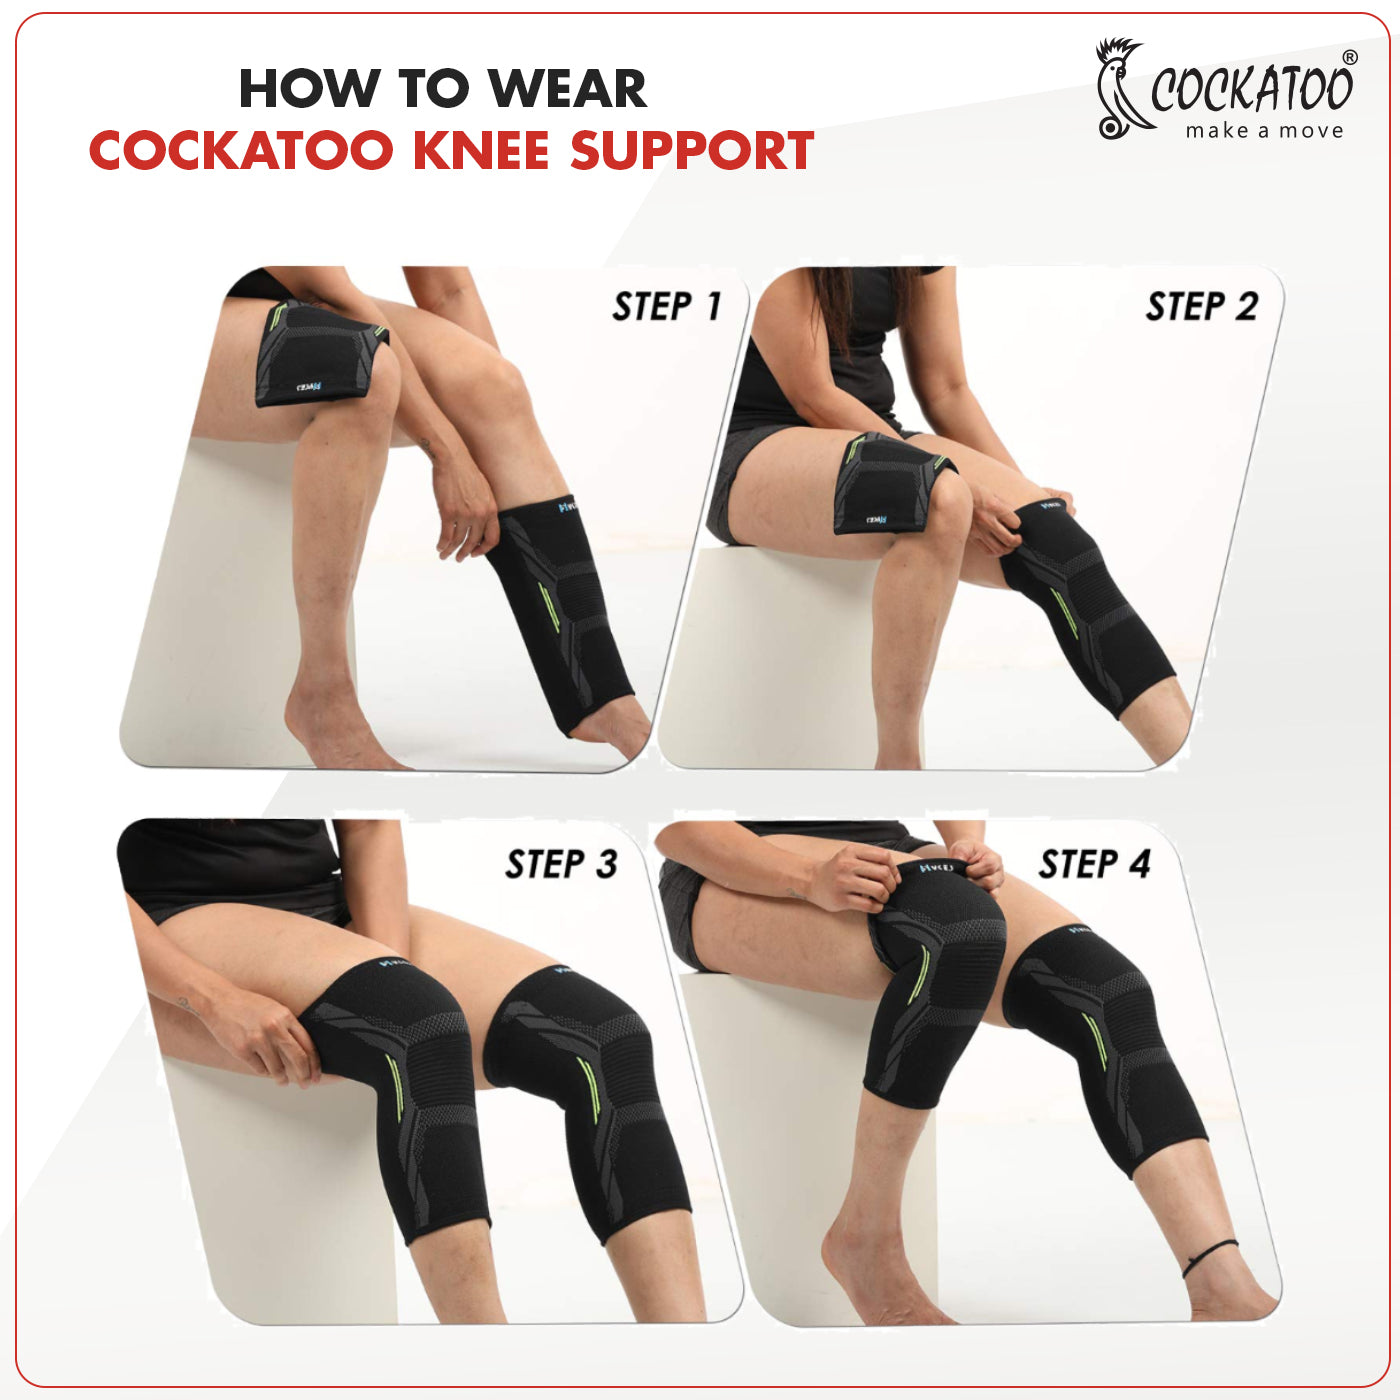 Cockatoo Knee Compression Support KN-111 - Nylon & Spandex Material - Green Color - Extra-Large Size - for Gym, Running, Cycling, Sports, Jogging, Workout, and Pain Relief